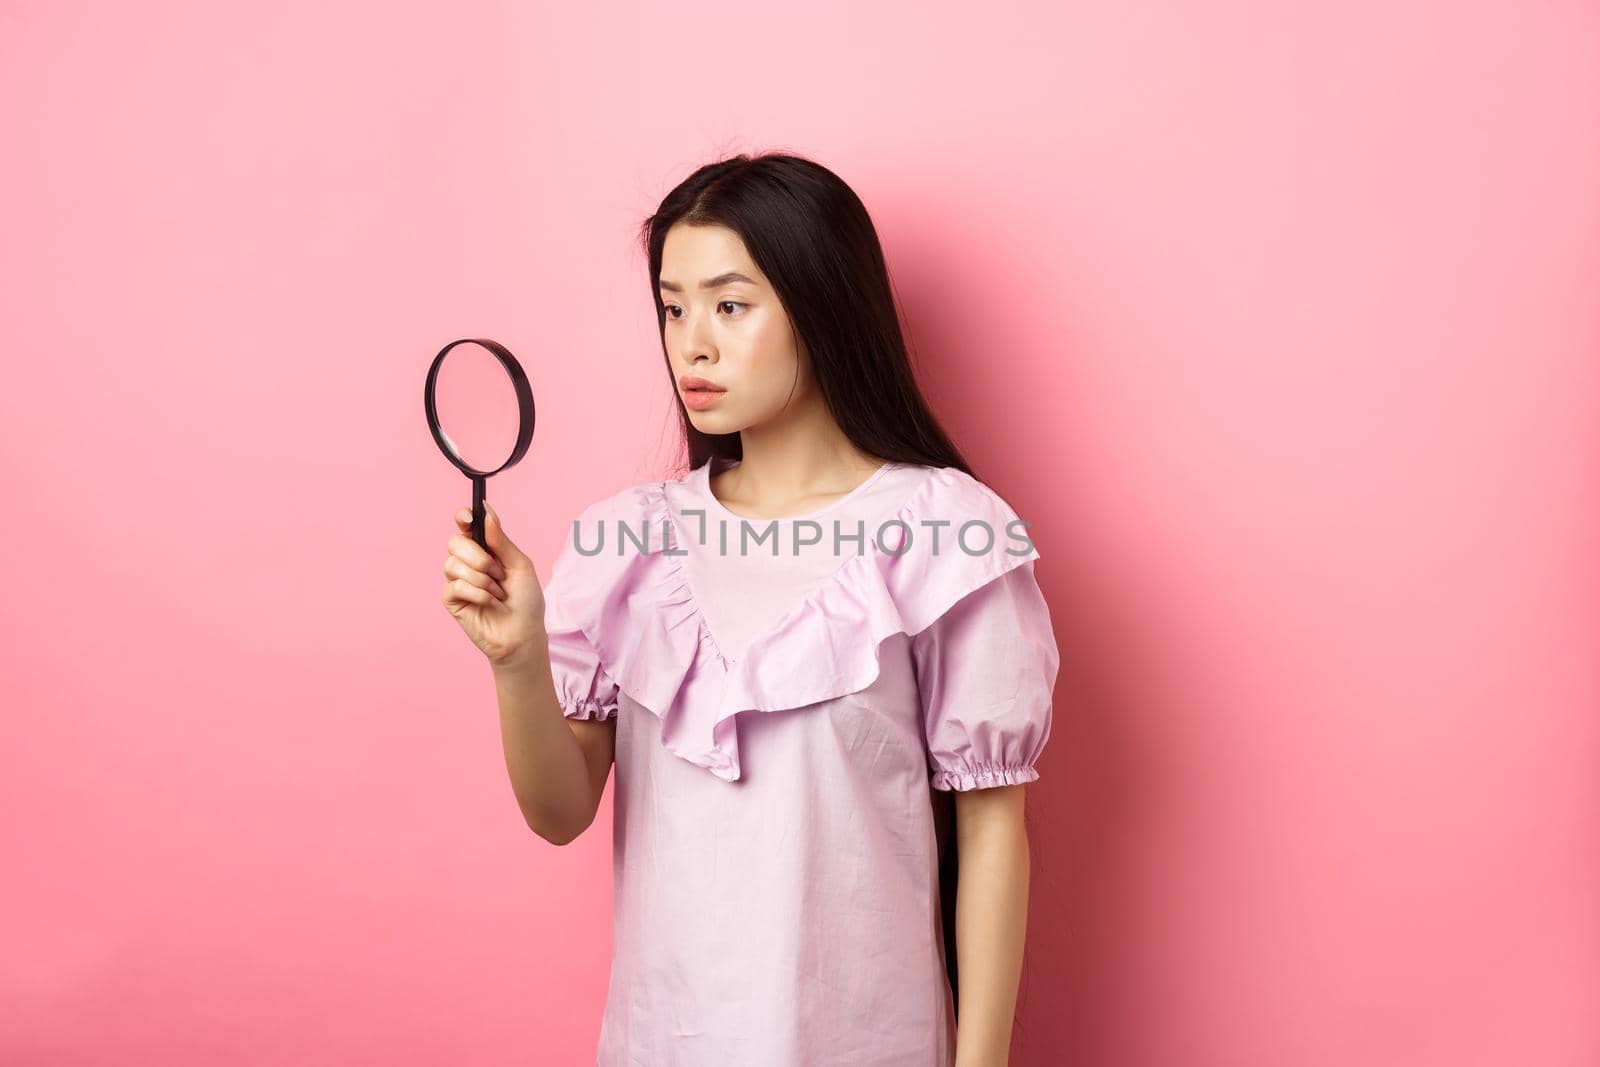 Serious girl investigating, looking through magnifying glass, searching for something, standing against pink background.